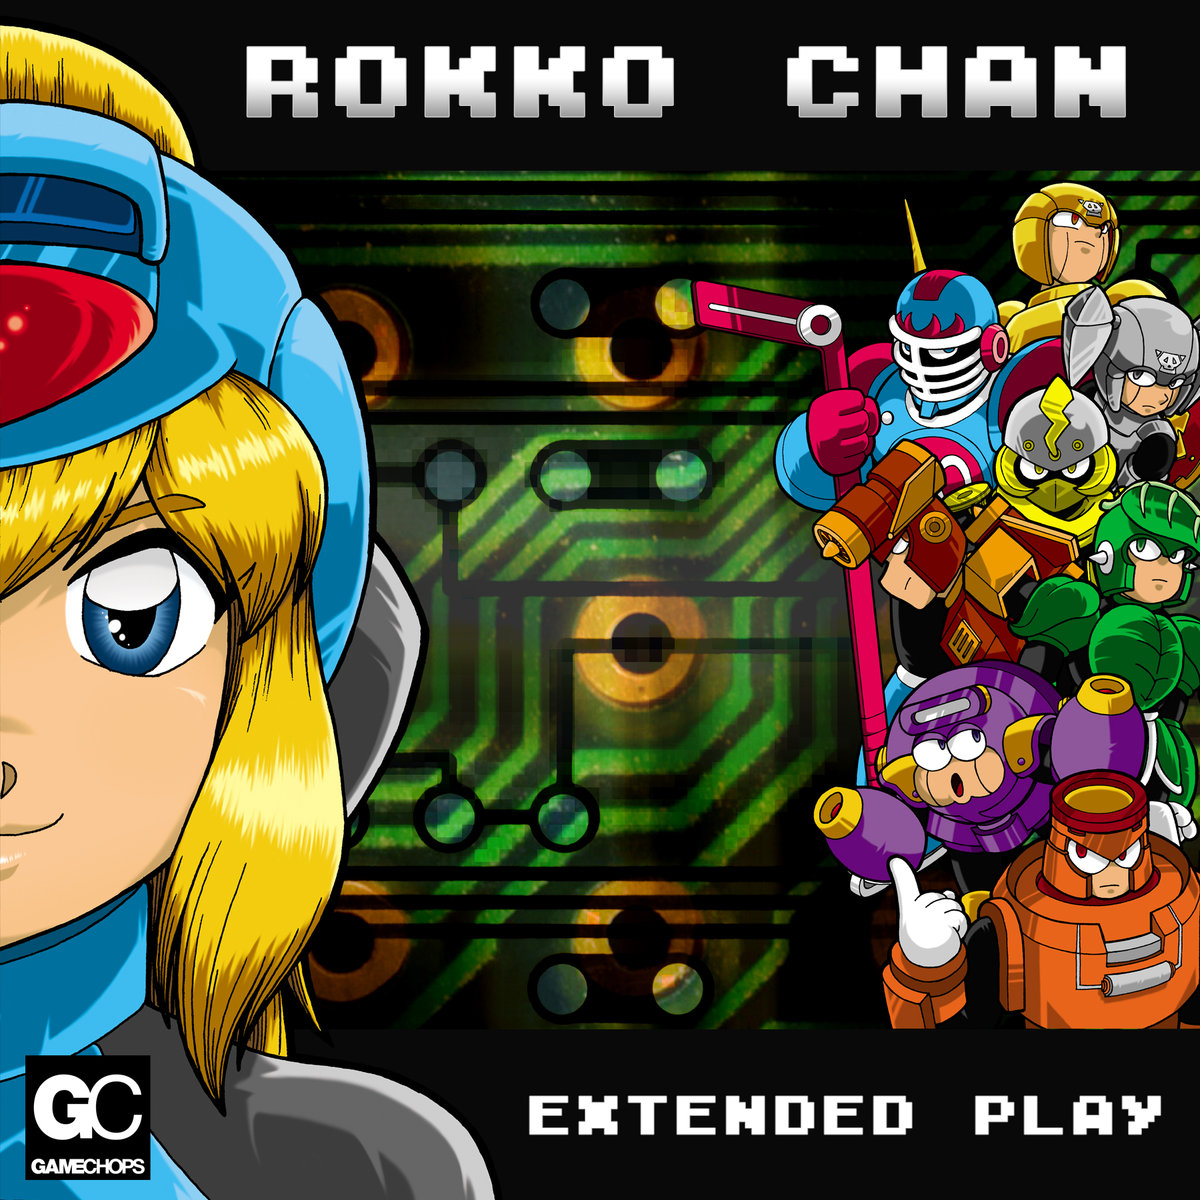 Rokko Chan Games To Play For Free